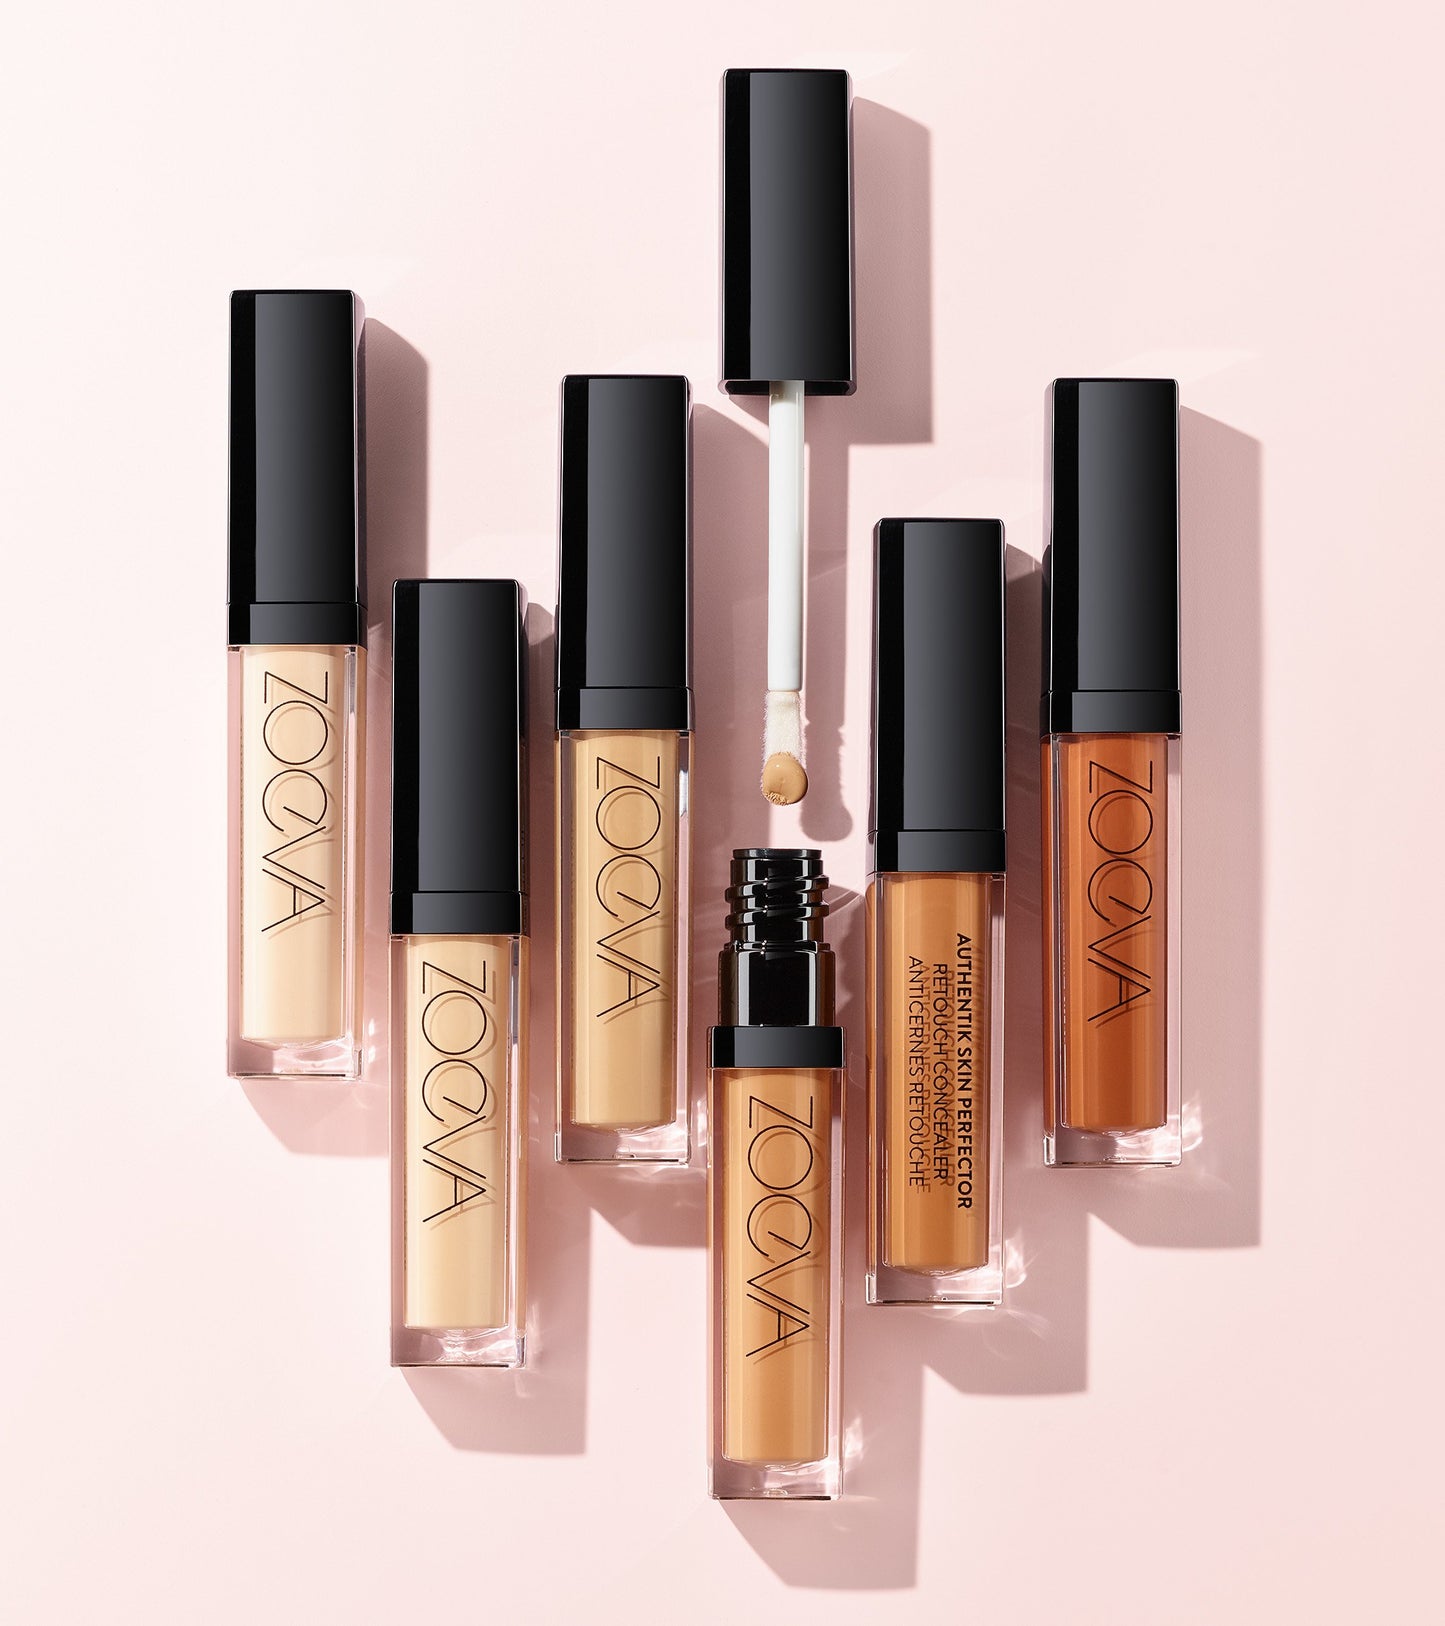 AUTHENTIK SKIN PERFECTOR CONCEALER (300 VALID) Expanded Image 4